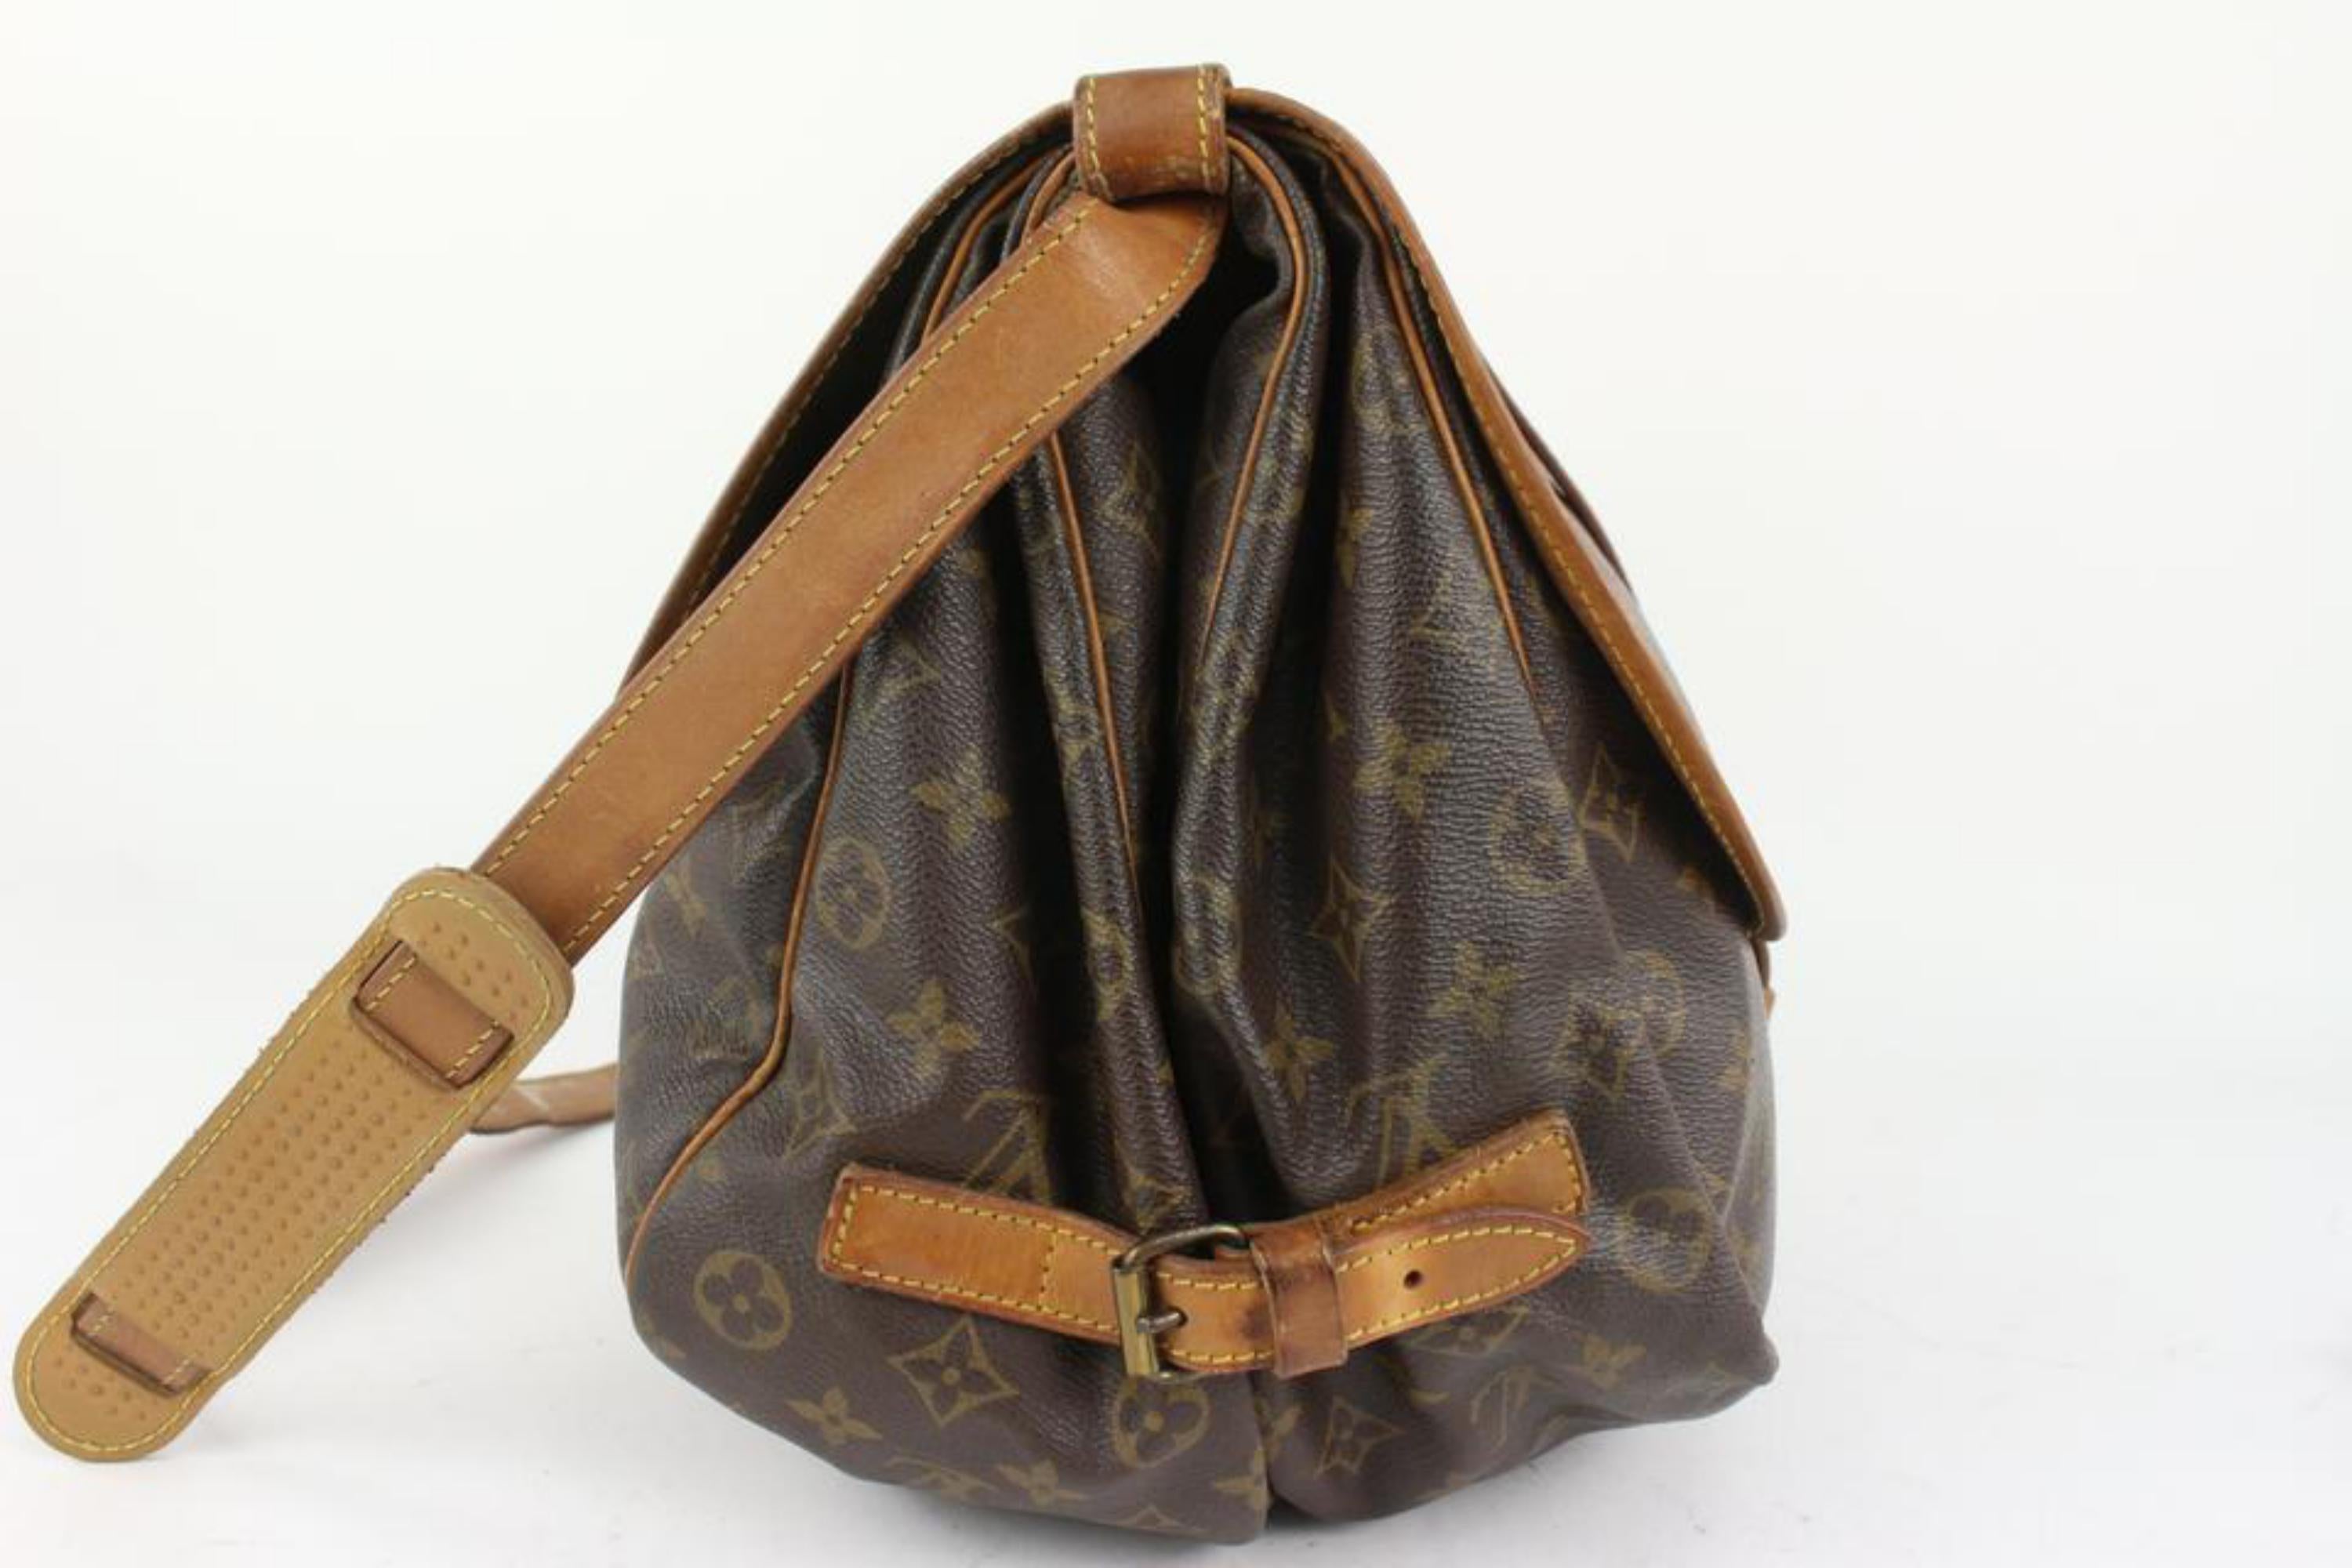 Louis Vuitton Monogram Saumur 35 Crossbody Messenger Bag 1018lv7 In Fair Condition For Sale In Dix hills, NY